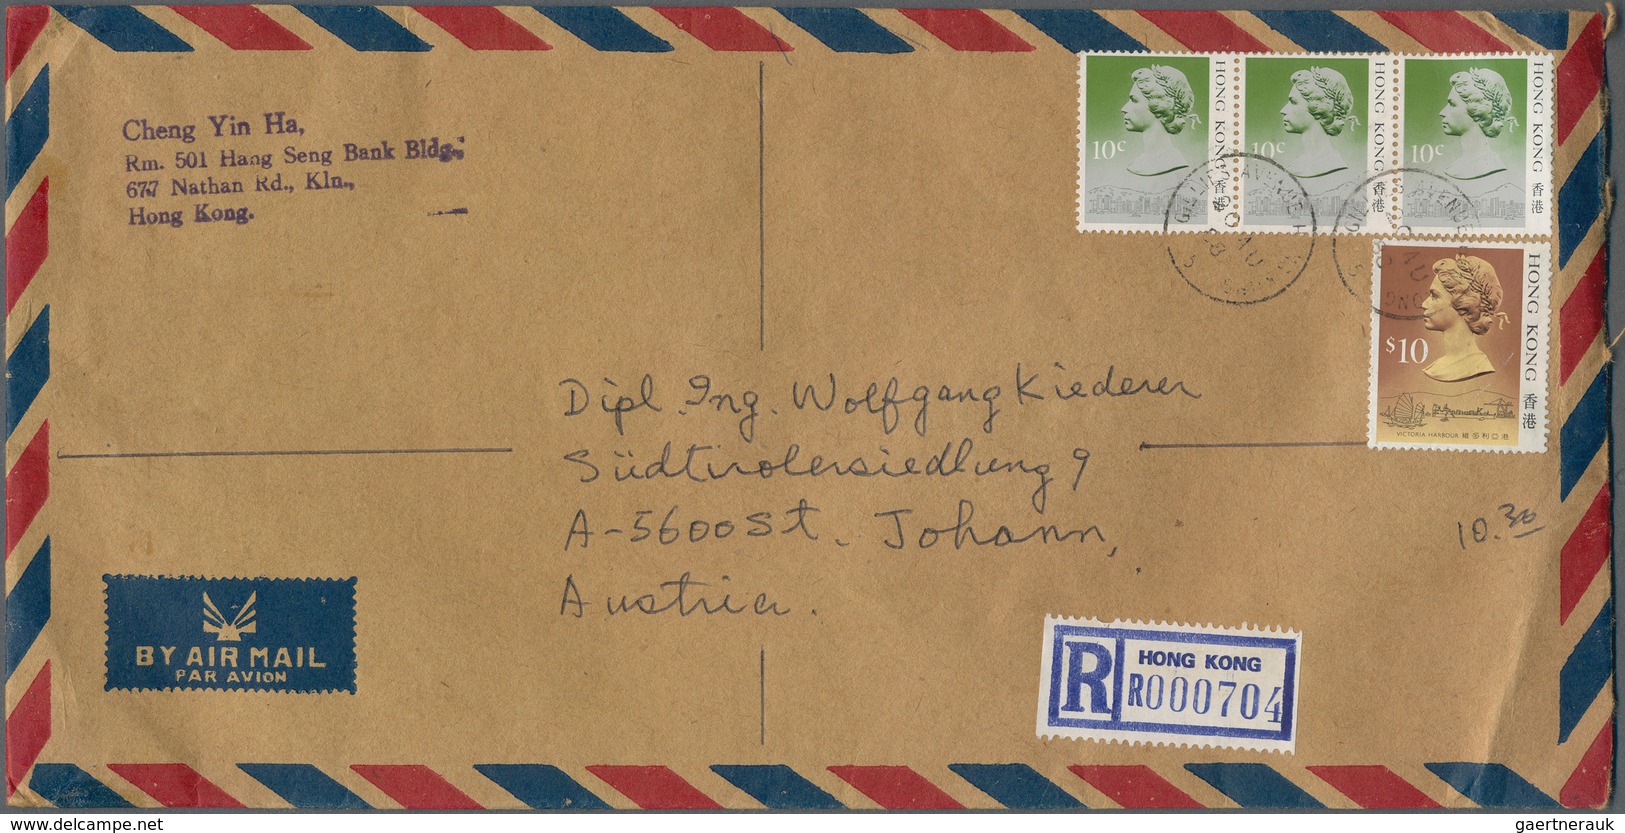 China - Volksrepublik: 1969/95, covers/FDC/ppc and used stationery, appr. 330 items mostly used inla